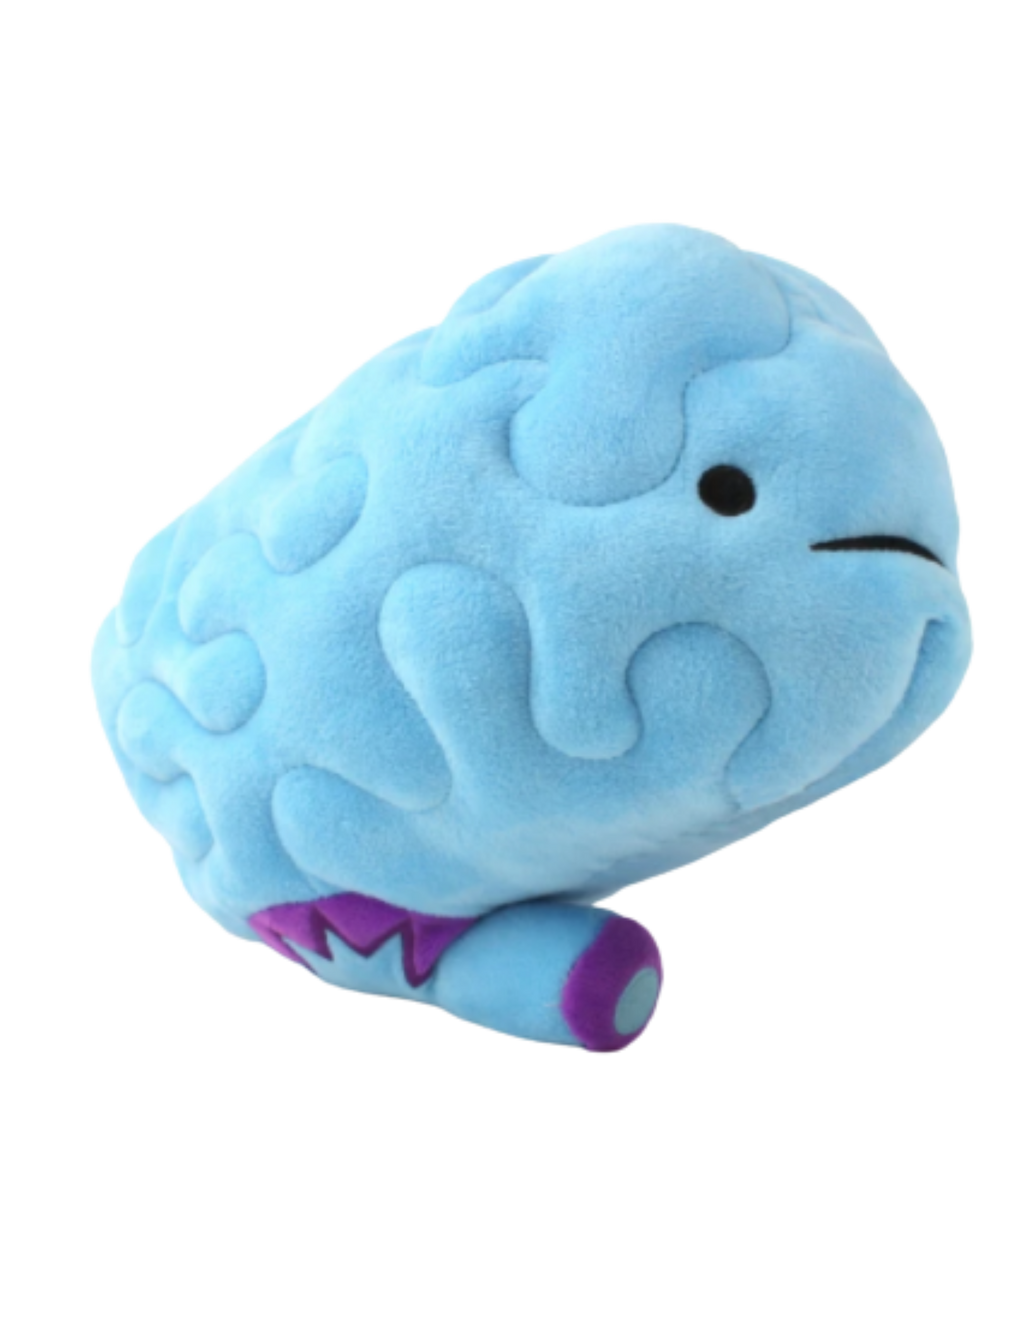 Brain Games & Puzzles: Gifts from Amazon: Brainplugg